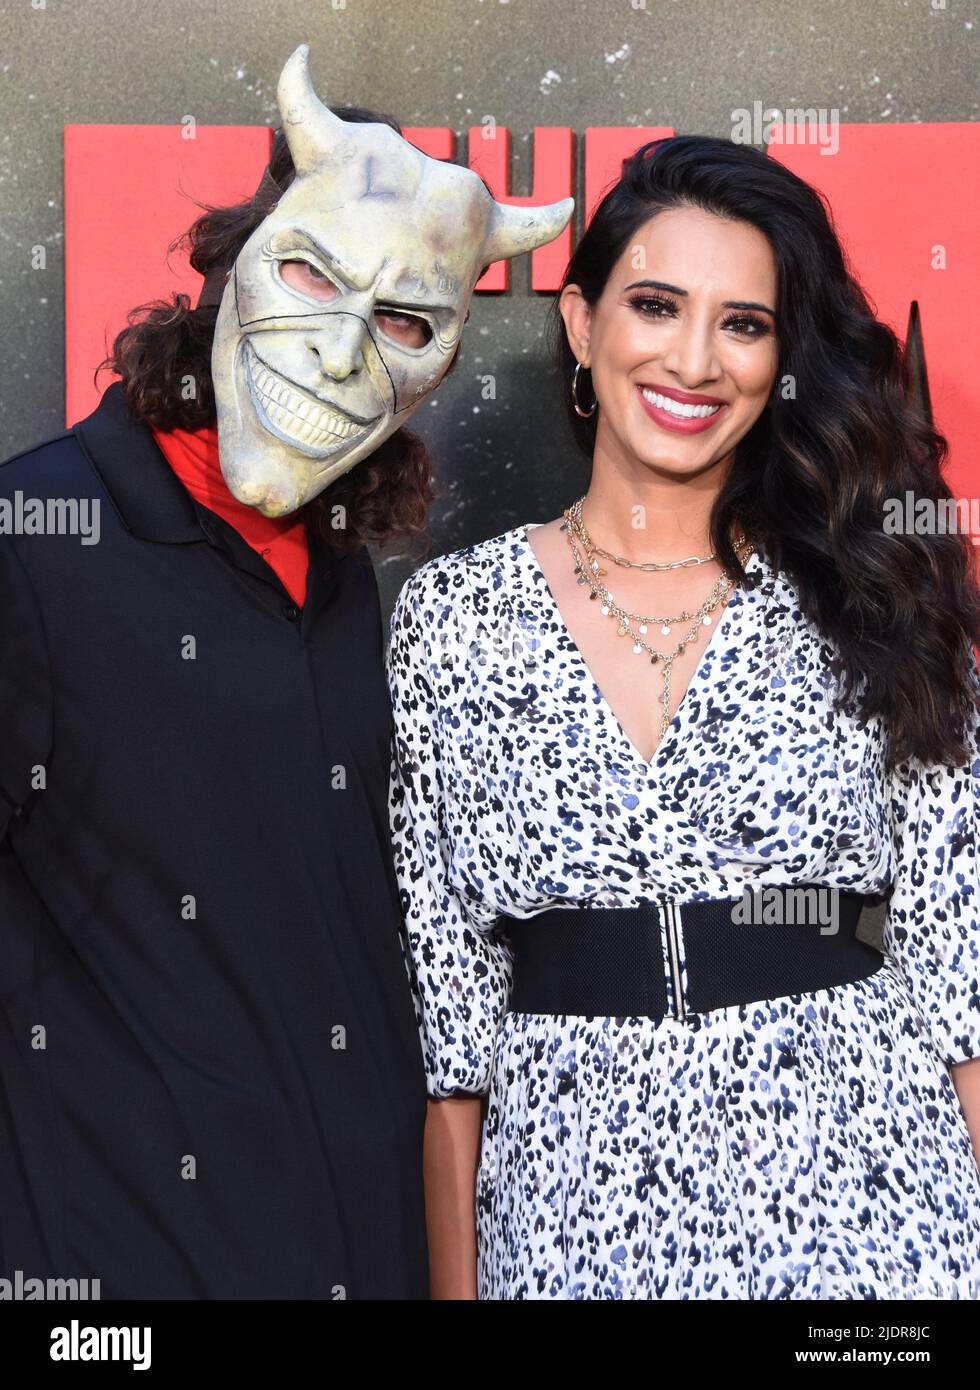 Hollywood, California, USA 21st June 2022 Hina X. Khan  attends Universal Pictures 'The Black Phone' Premiere at TCL Chinese Theatre on June 21, 2022 in Hollywood, California, USA. Photo by Barry King/Alamy Stock Photo Stock Photo